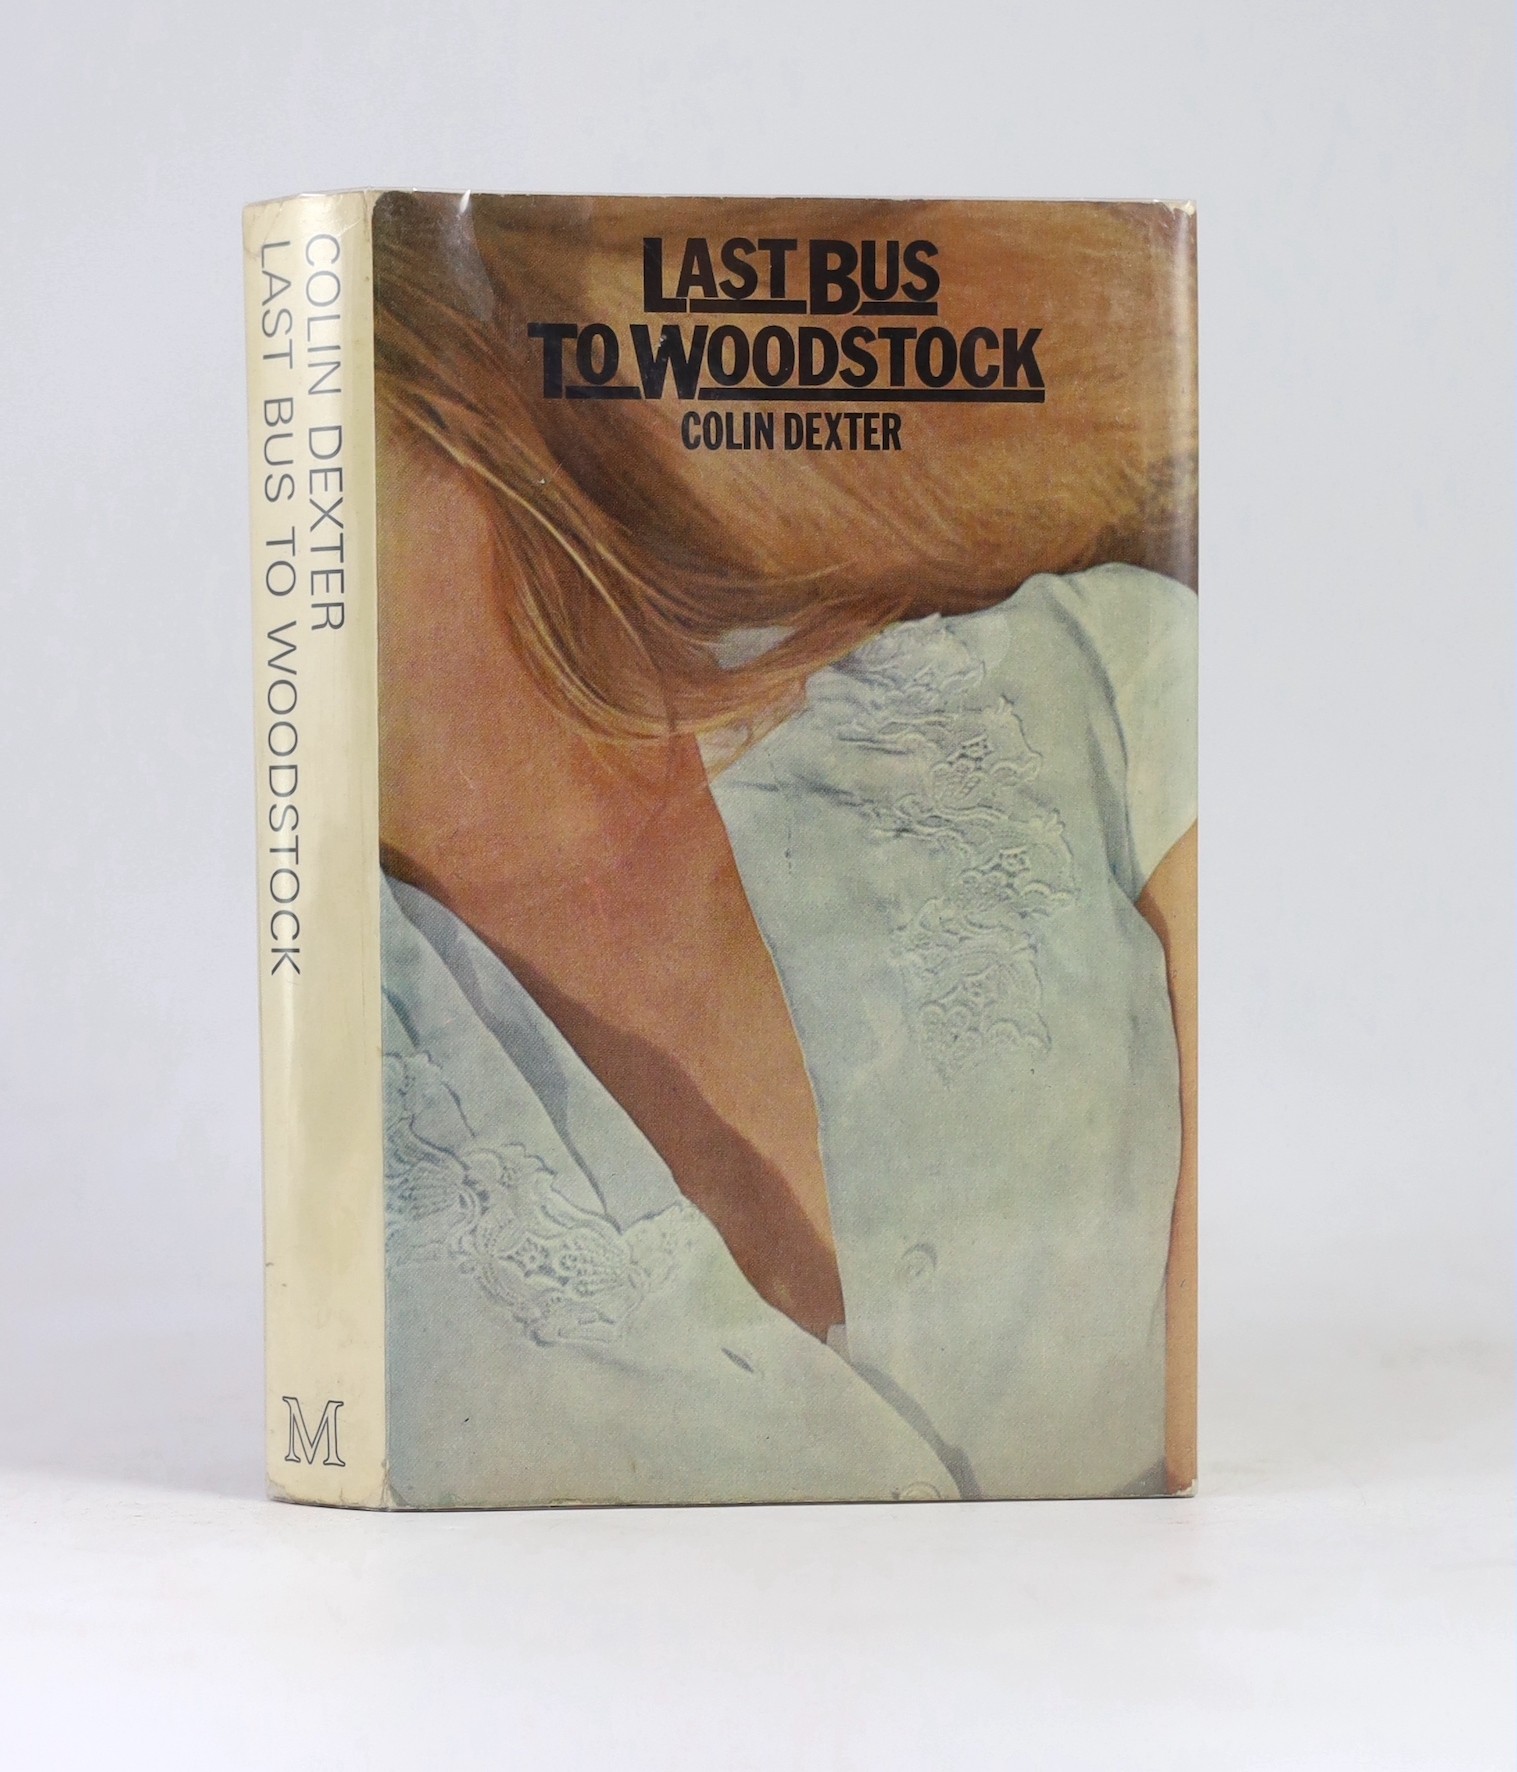 Dexter, Colin - Last Bus to Woodstock, 1st edition, signed on title page by the author, 8vo, original cloth in clipped d/j, with usual uniform page yellowing to text block and edges, Macmillan, London, 1975